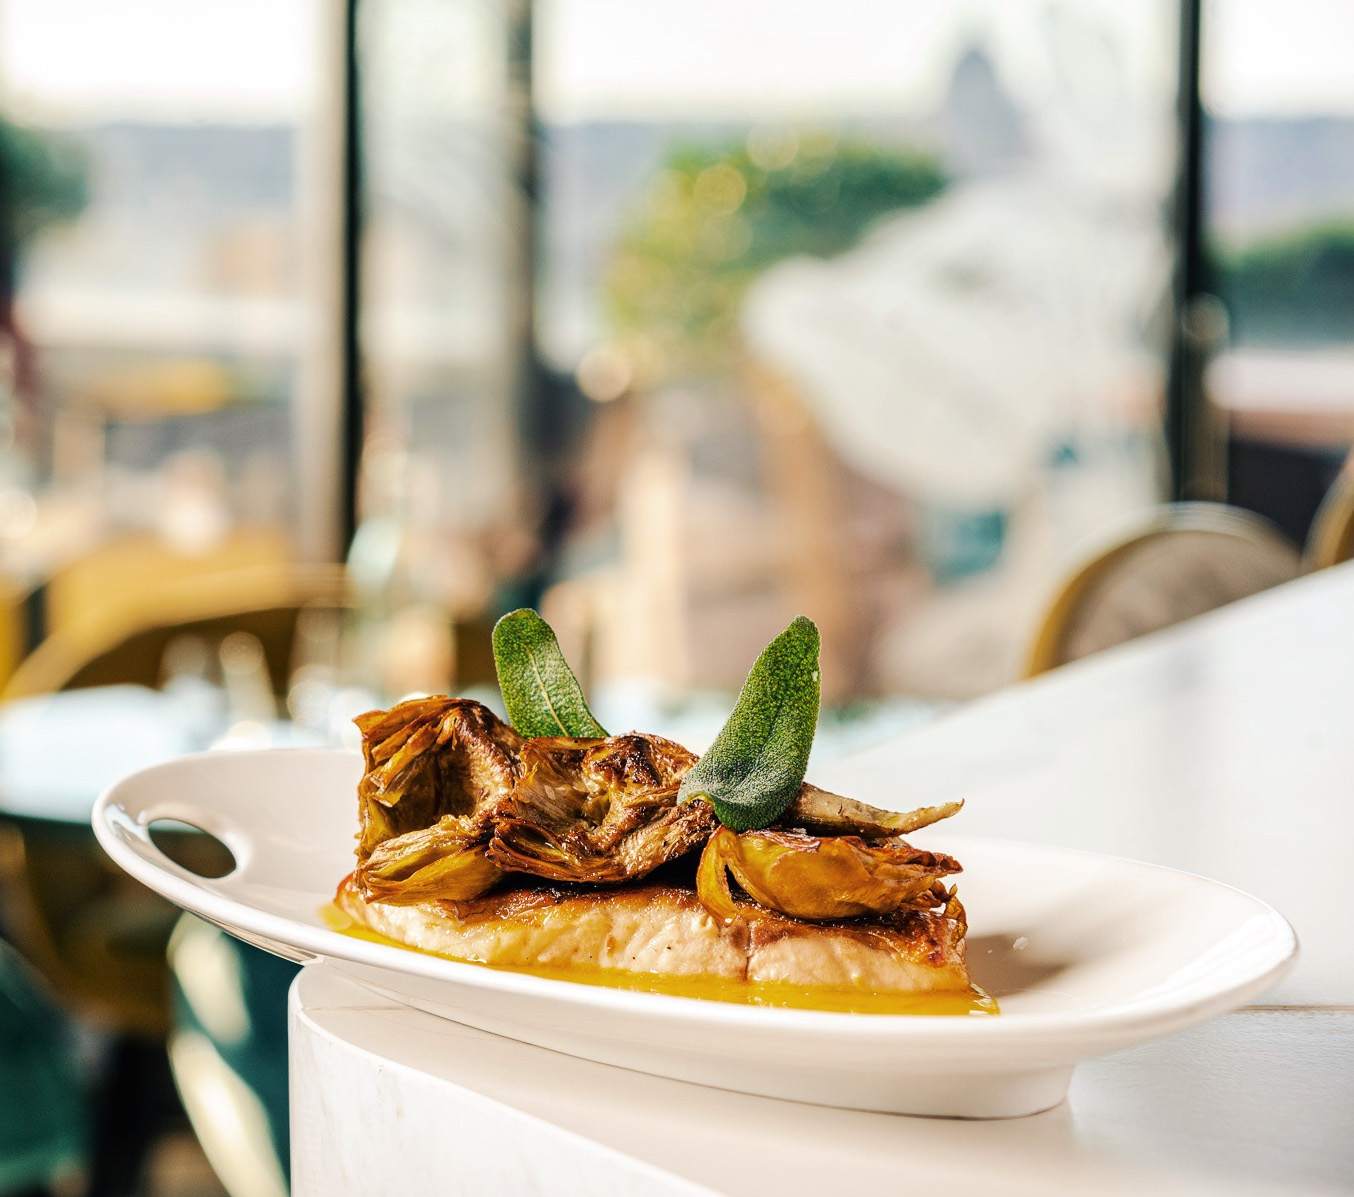 Guests staying at Sofitel Rome Villa Borghese now have the opportunity to bite down hard on Rome’s food scene with a new itinerary developed in conjunction with Davvero Rome, one of the city’s leading culinary influencers and tour guides.